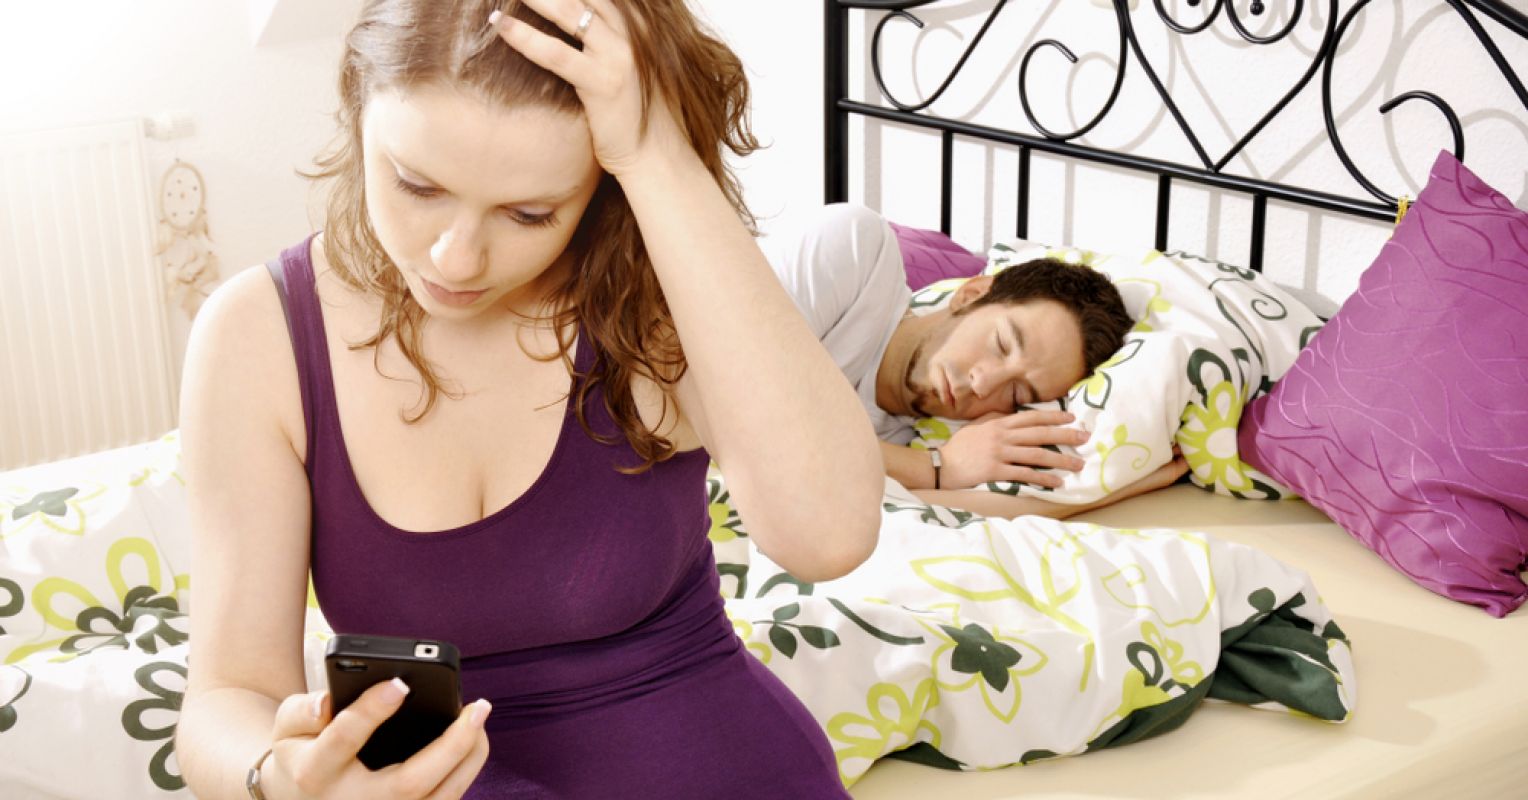 How Your Partners Phone Causes Jealousy Psychology Today picture